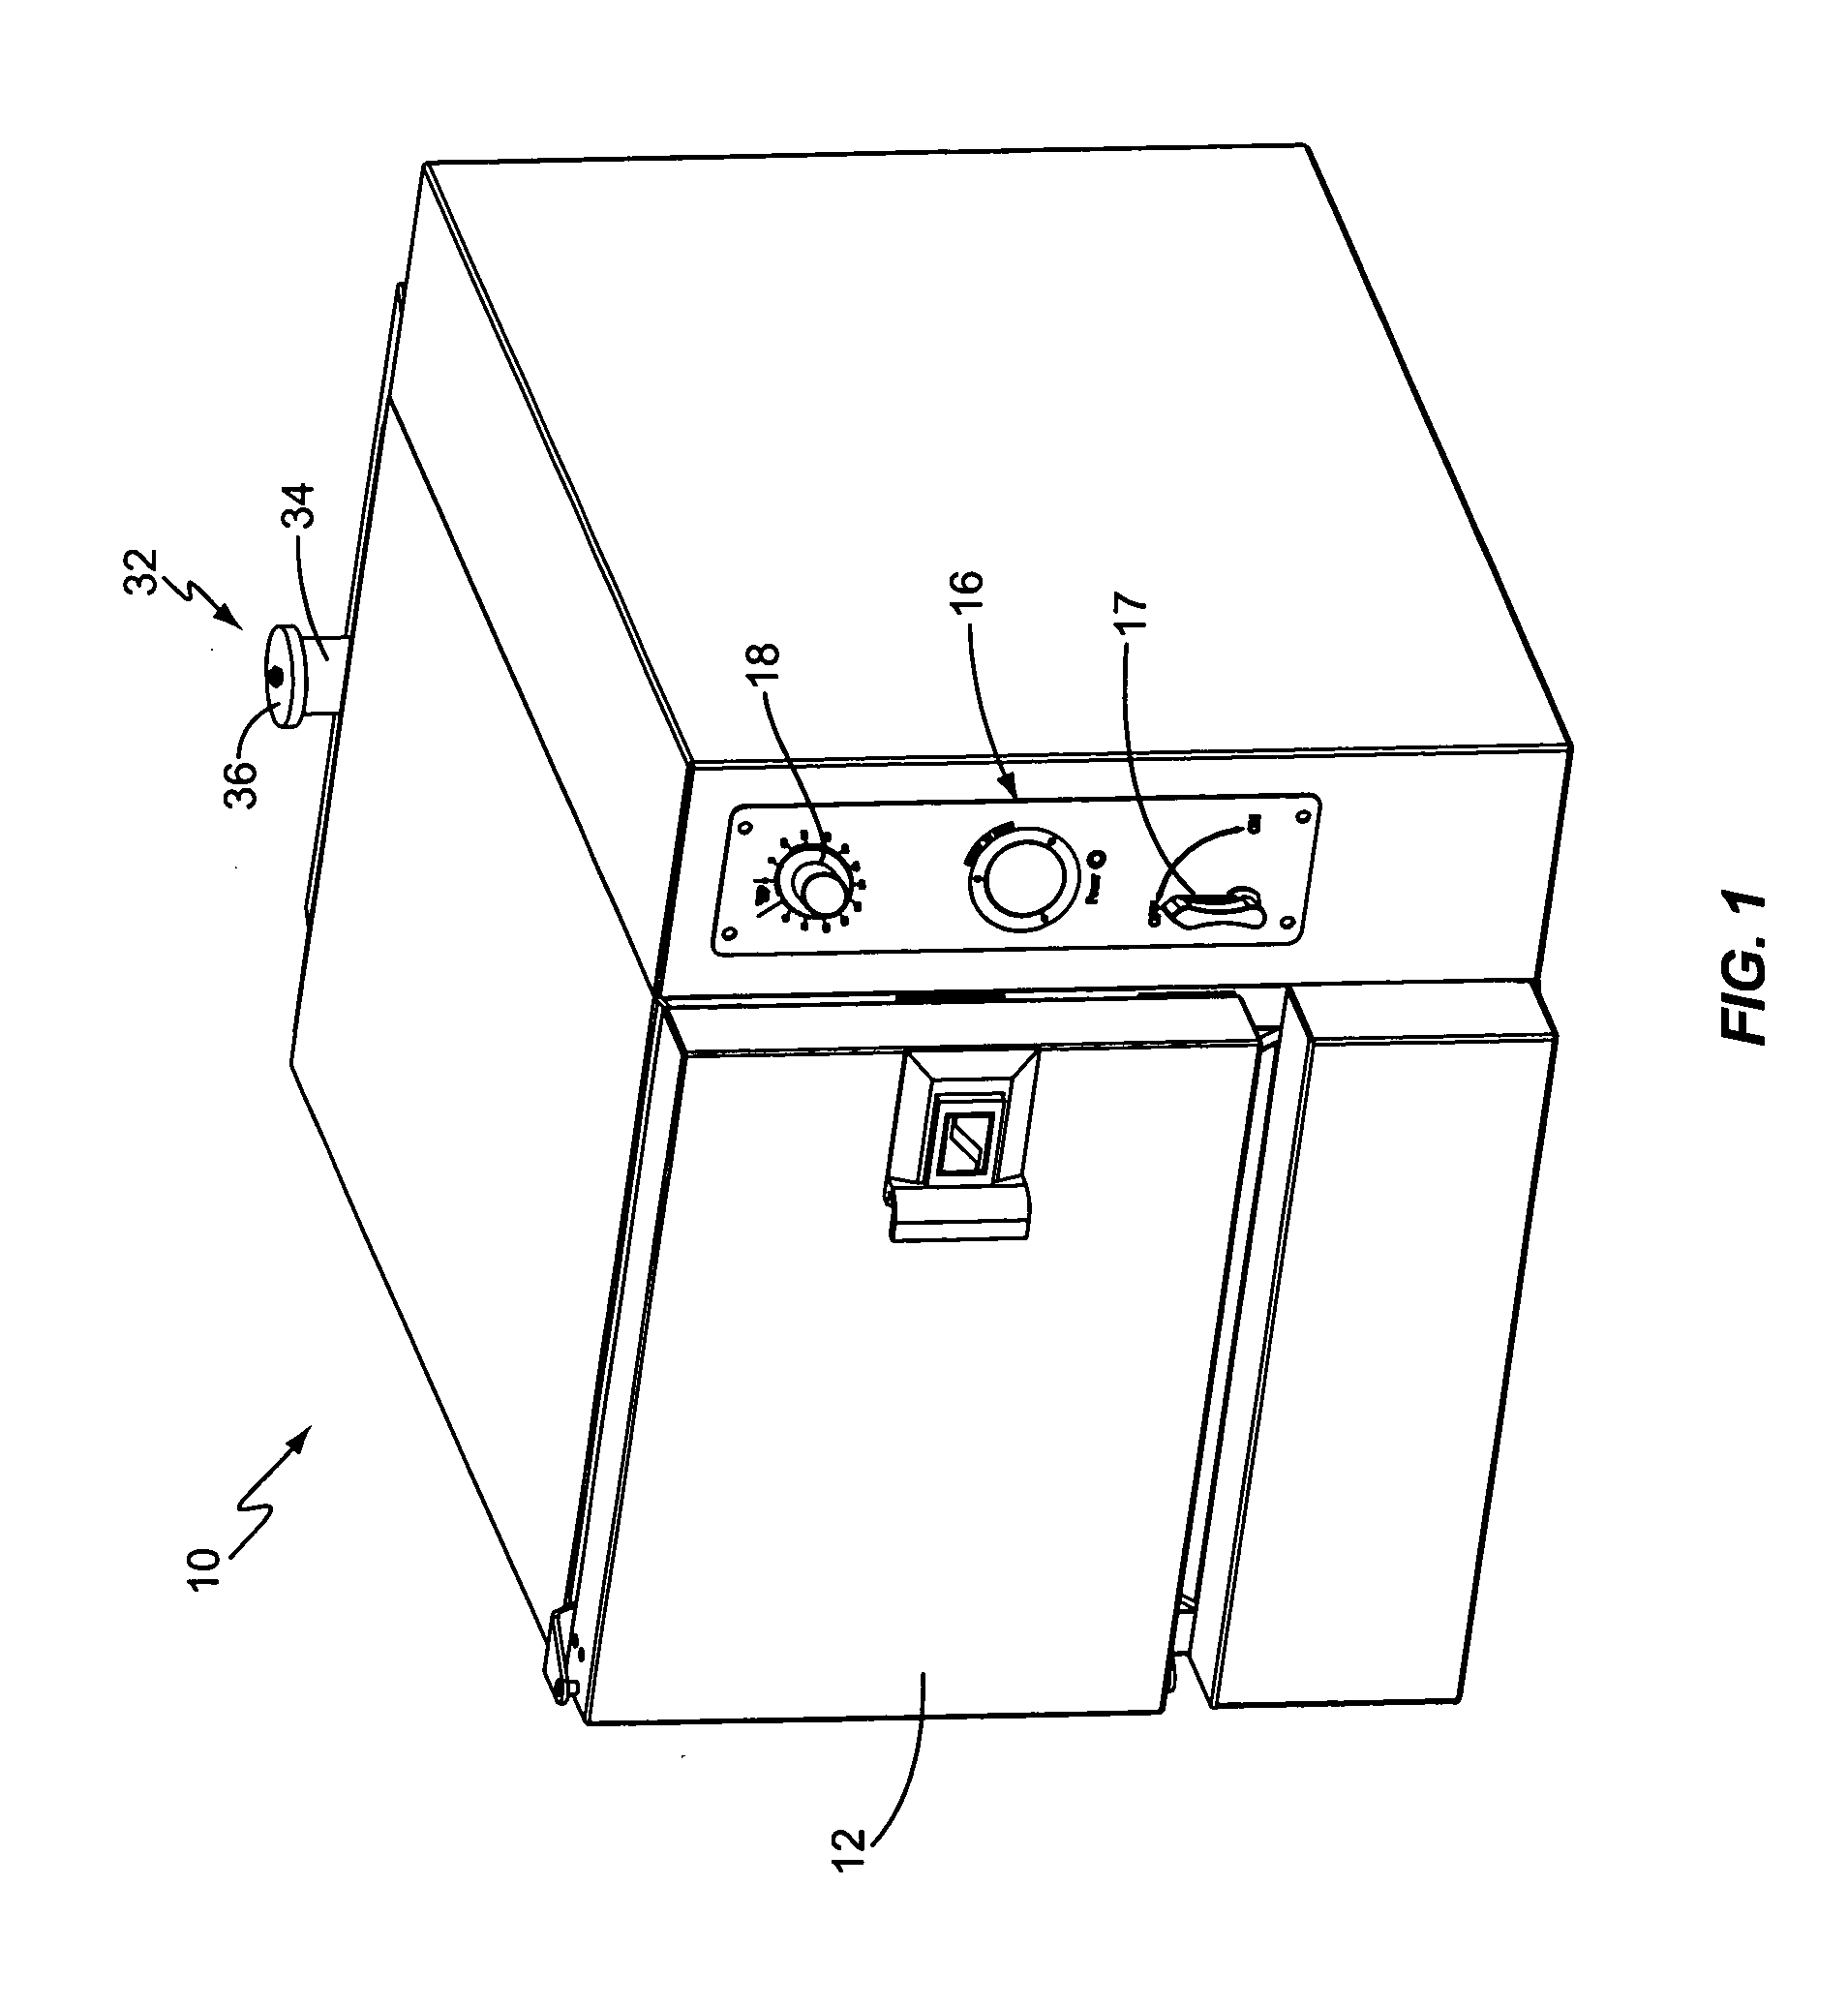 Natural convection steam cooking device